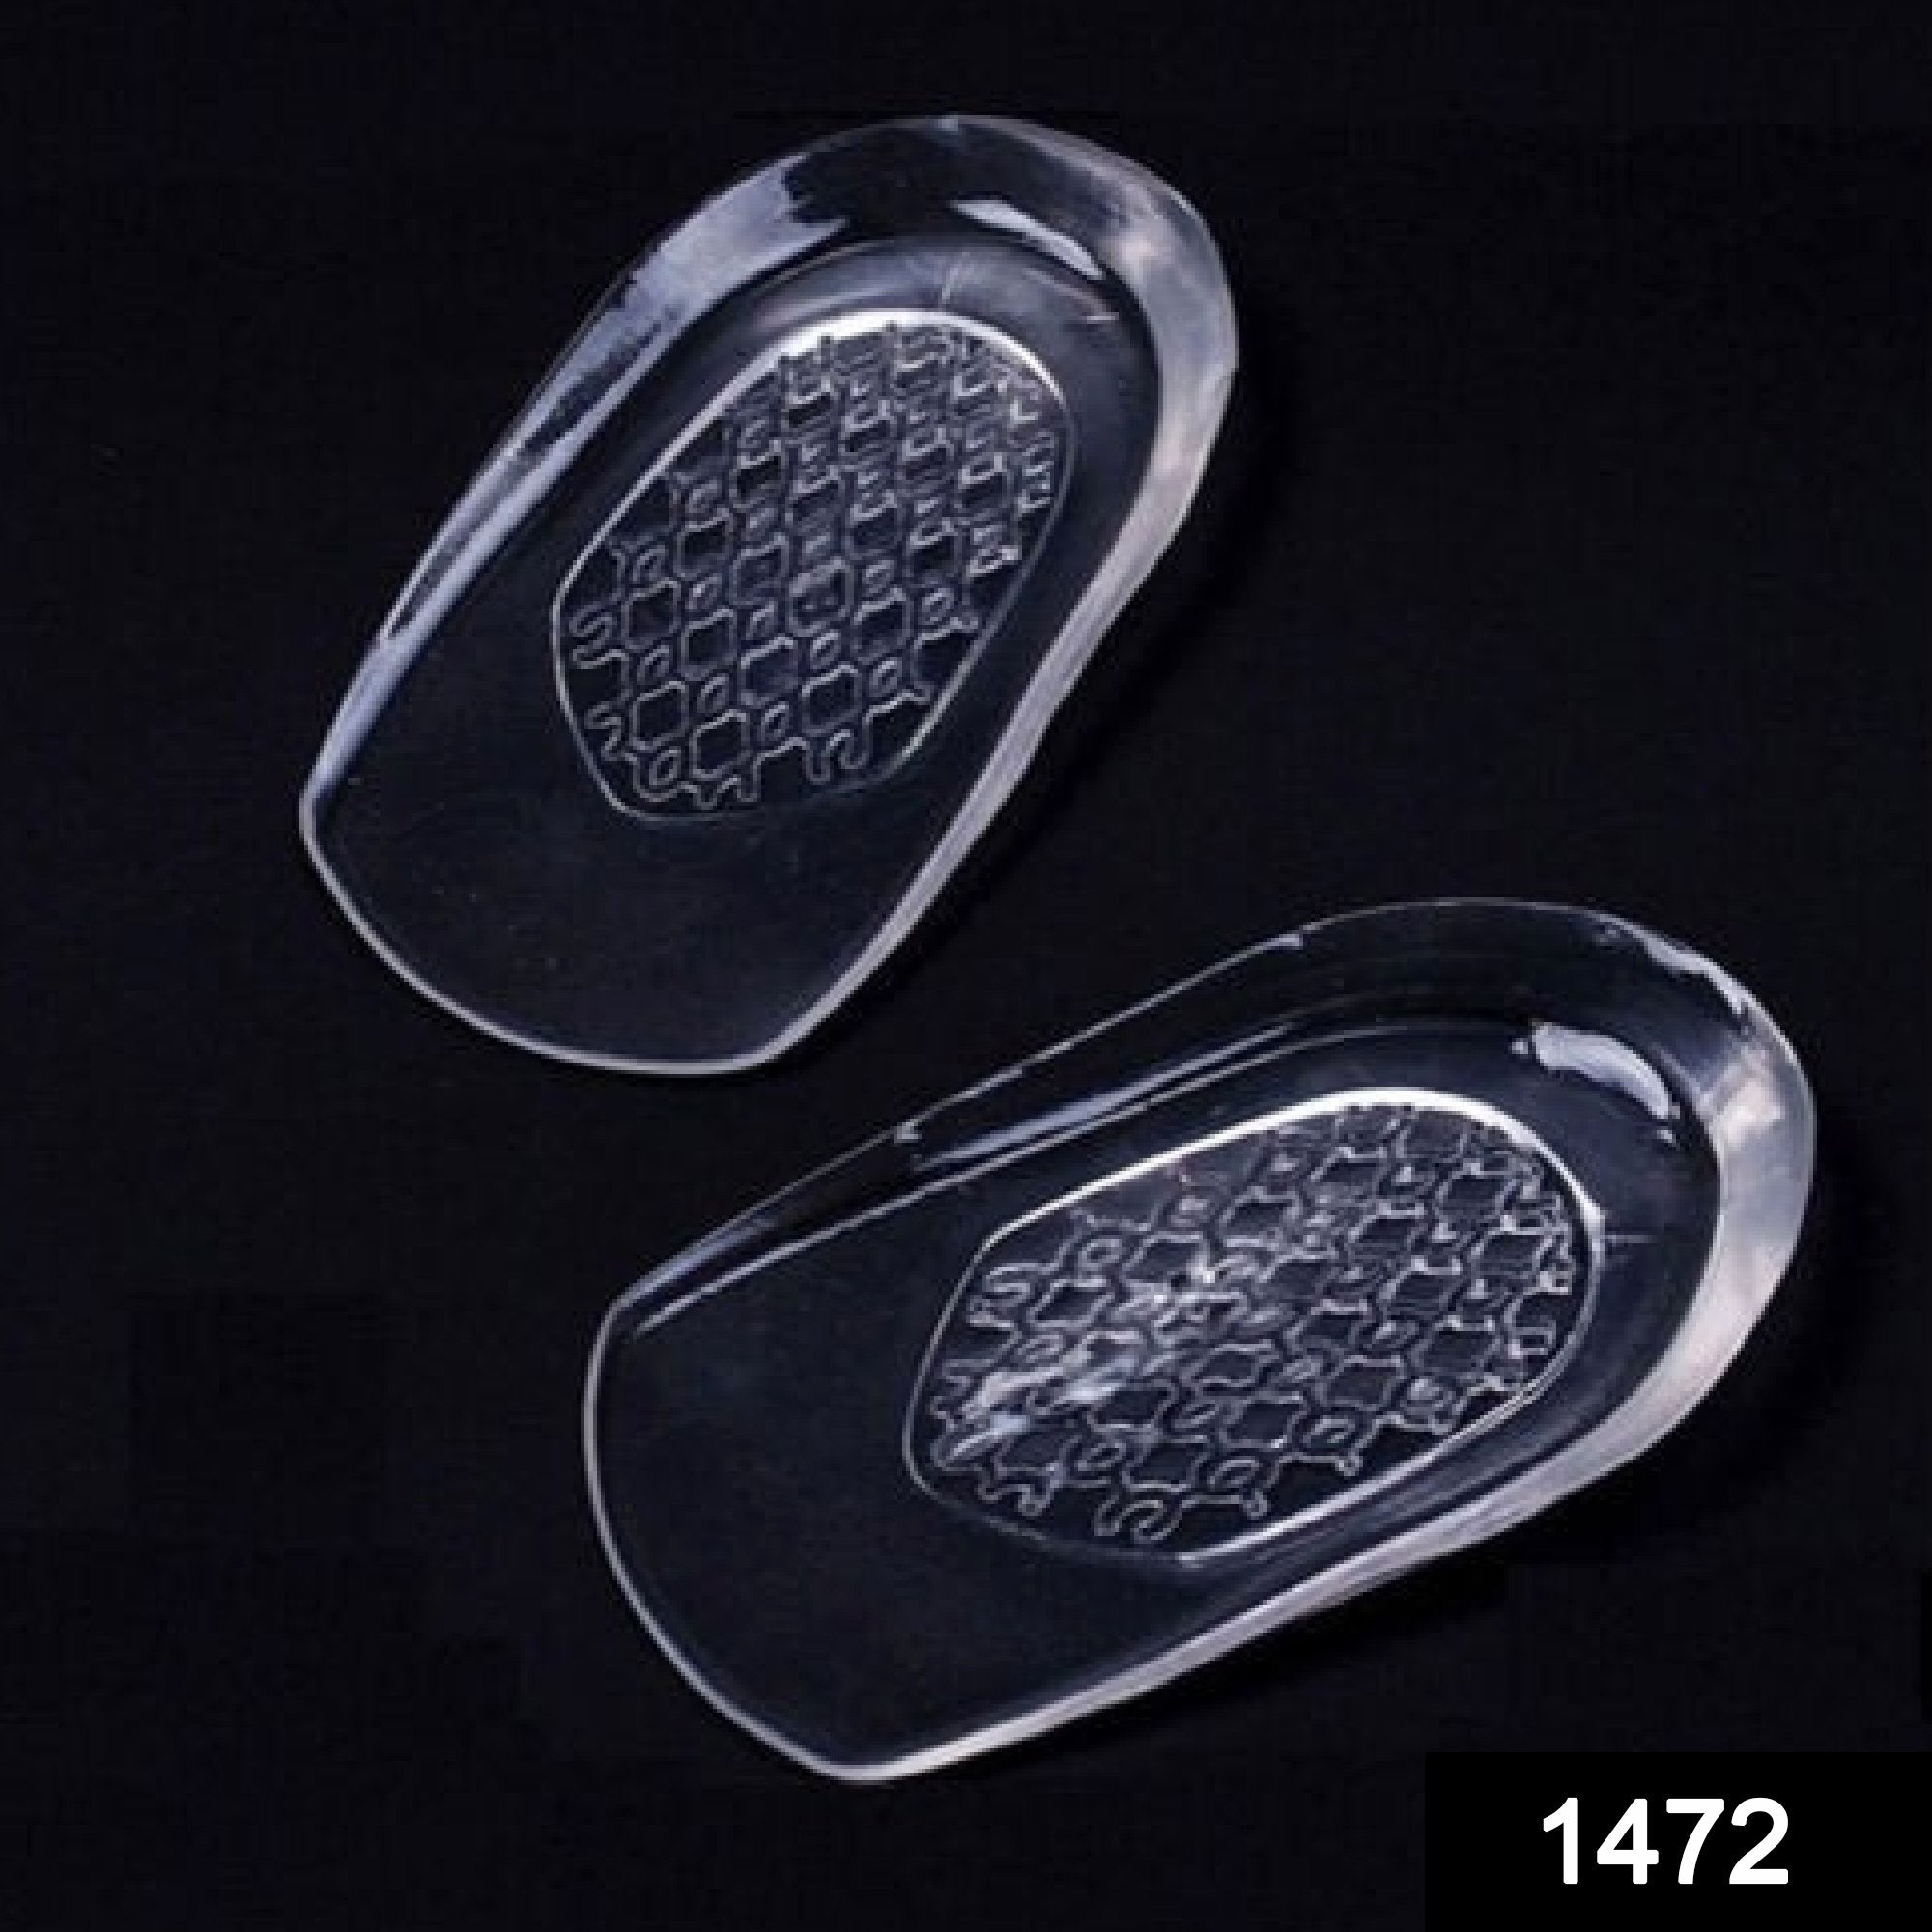 1472 Silicone Gel Heel Pad Protector Insole Cups for Heel Swelling Pain Relief - SkyShopy